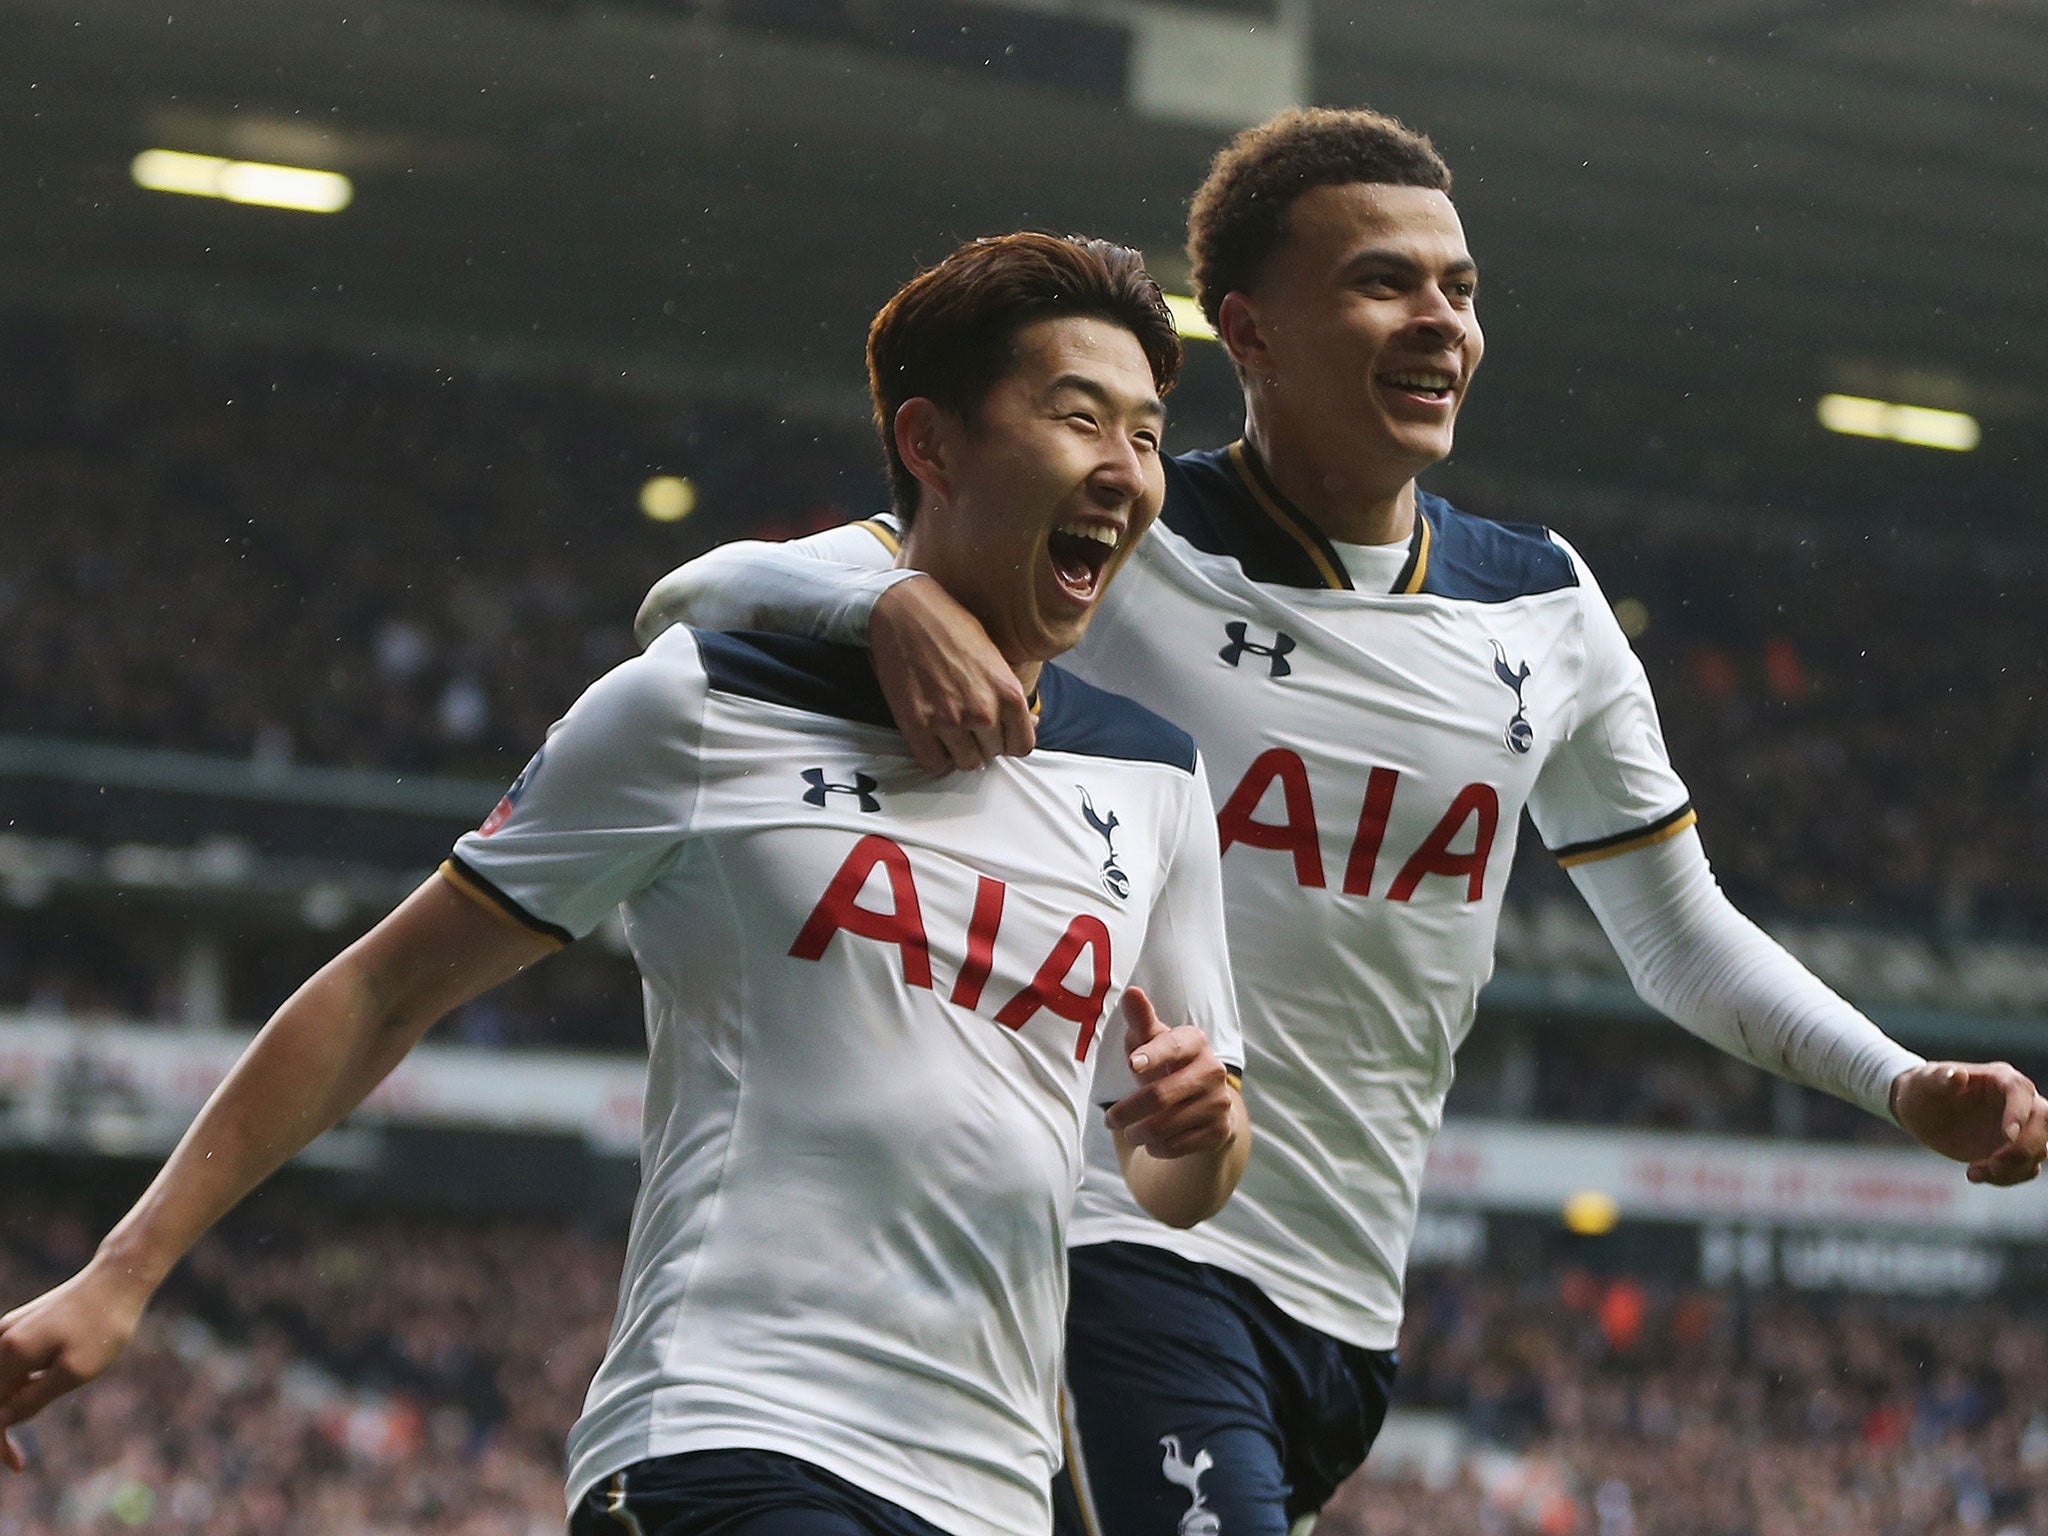 Son Heung-min celebrates with Dele Alli after scoring his second goal for Spurs against Millwall